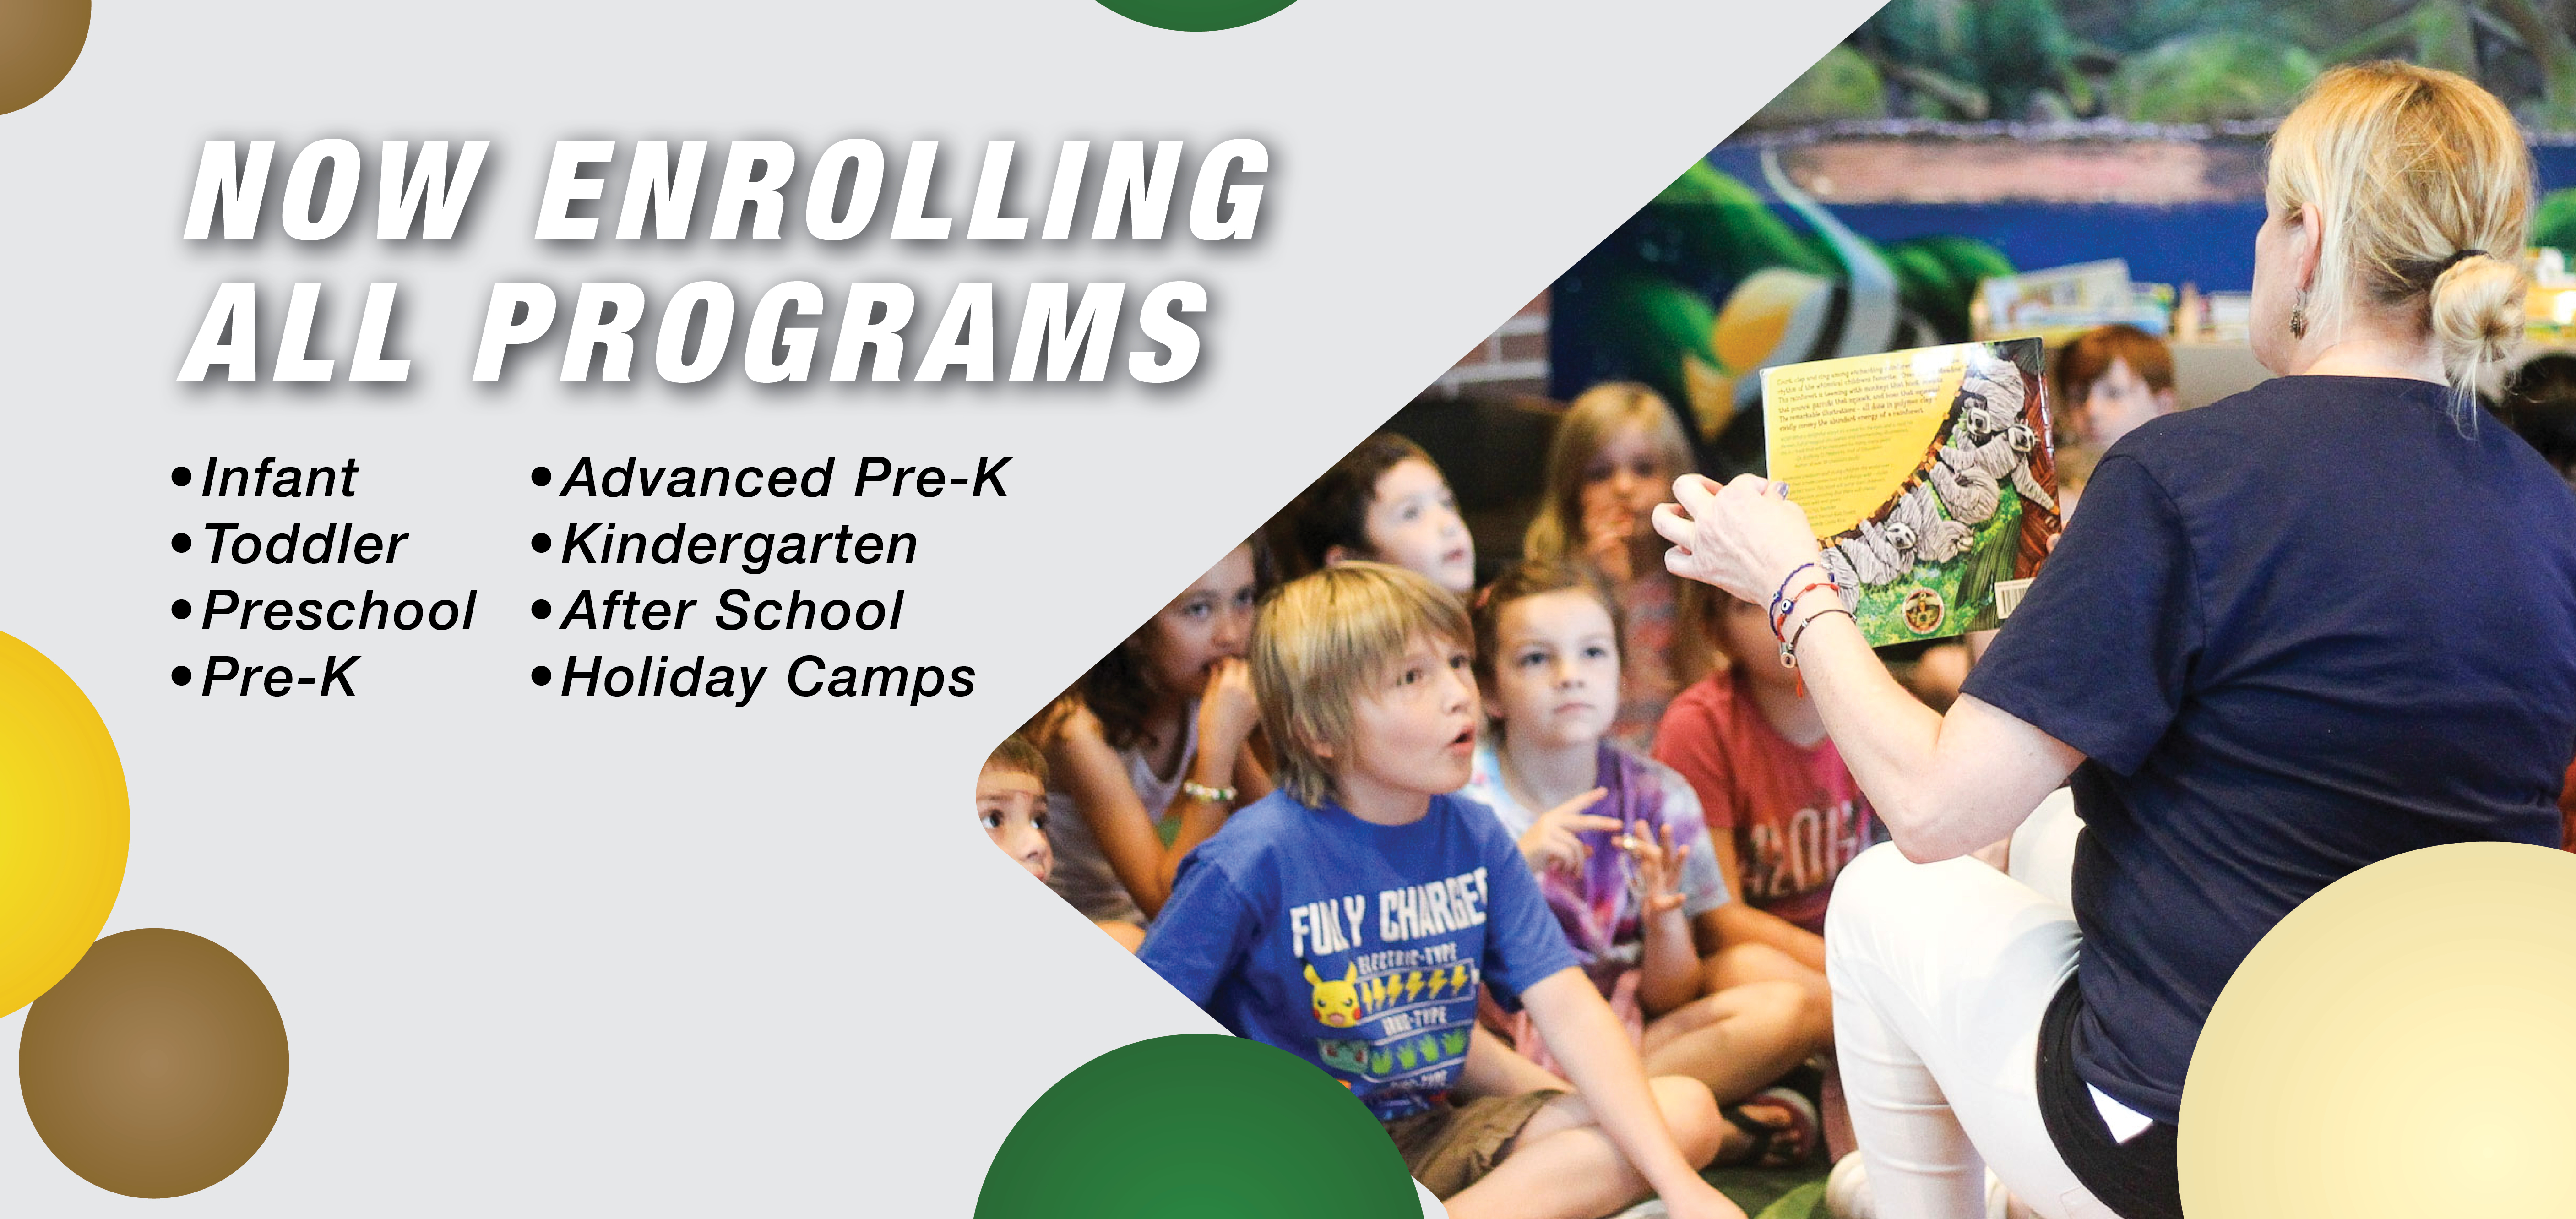 extra curricular pre-k early childhood education Image